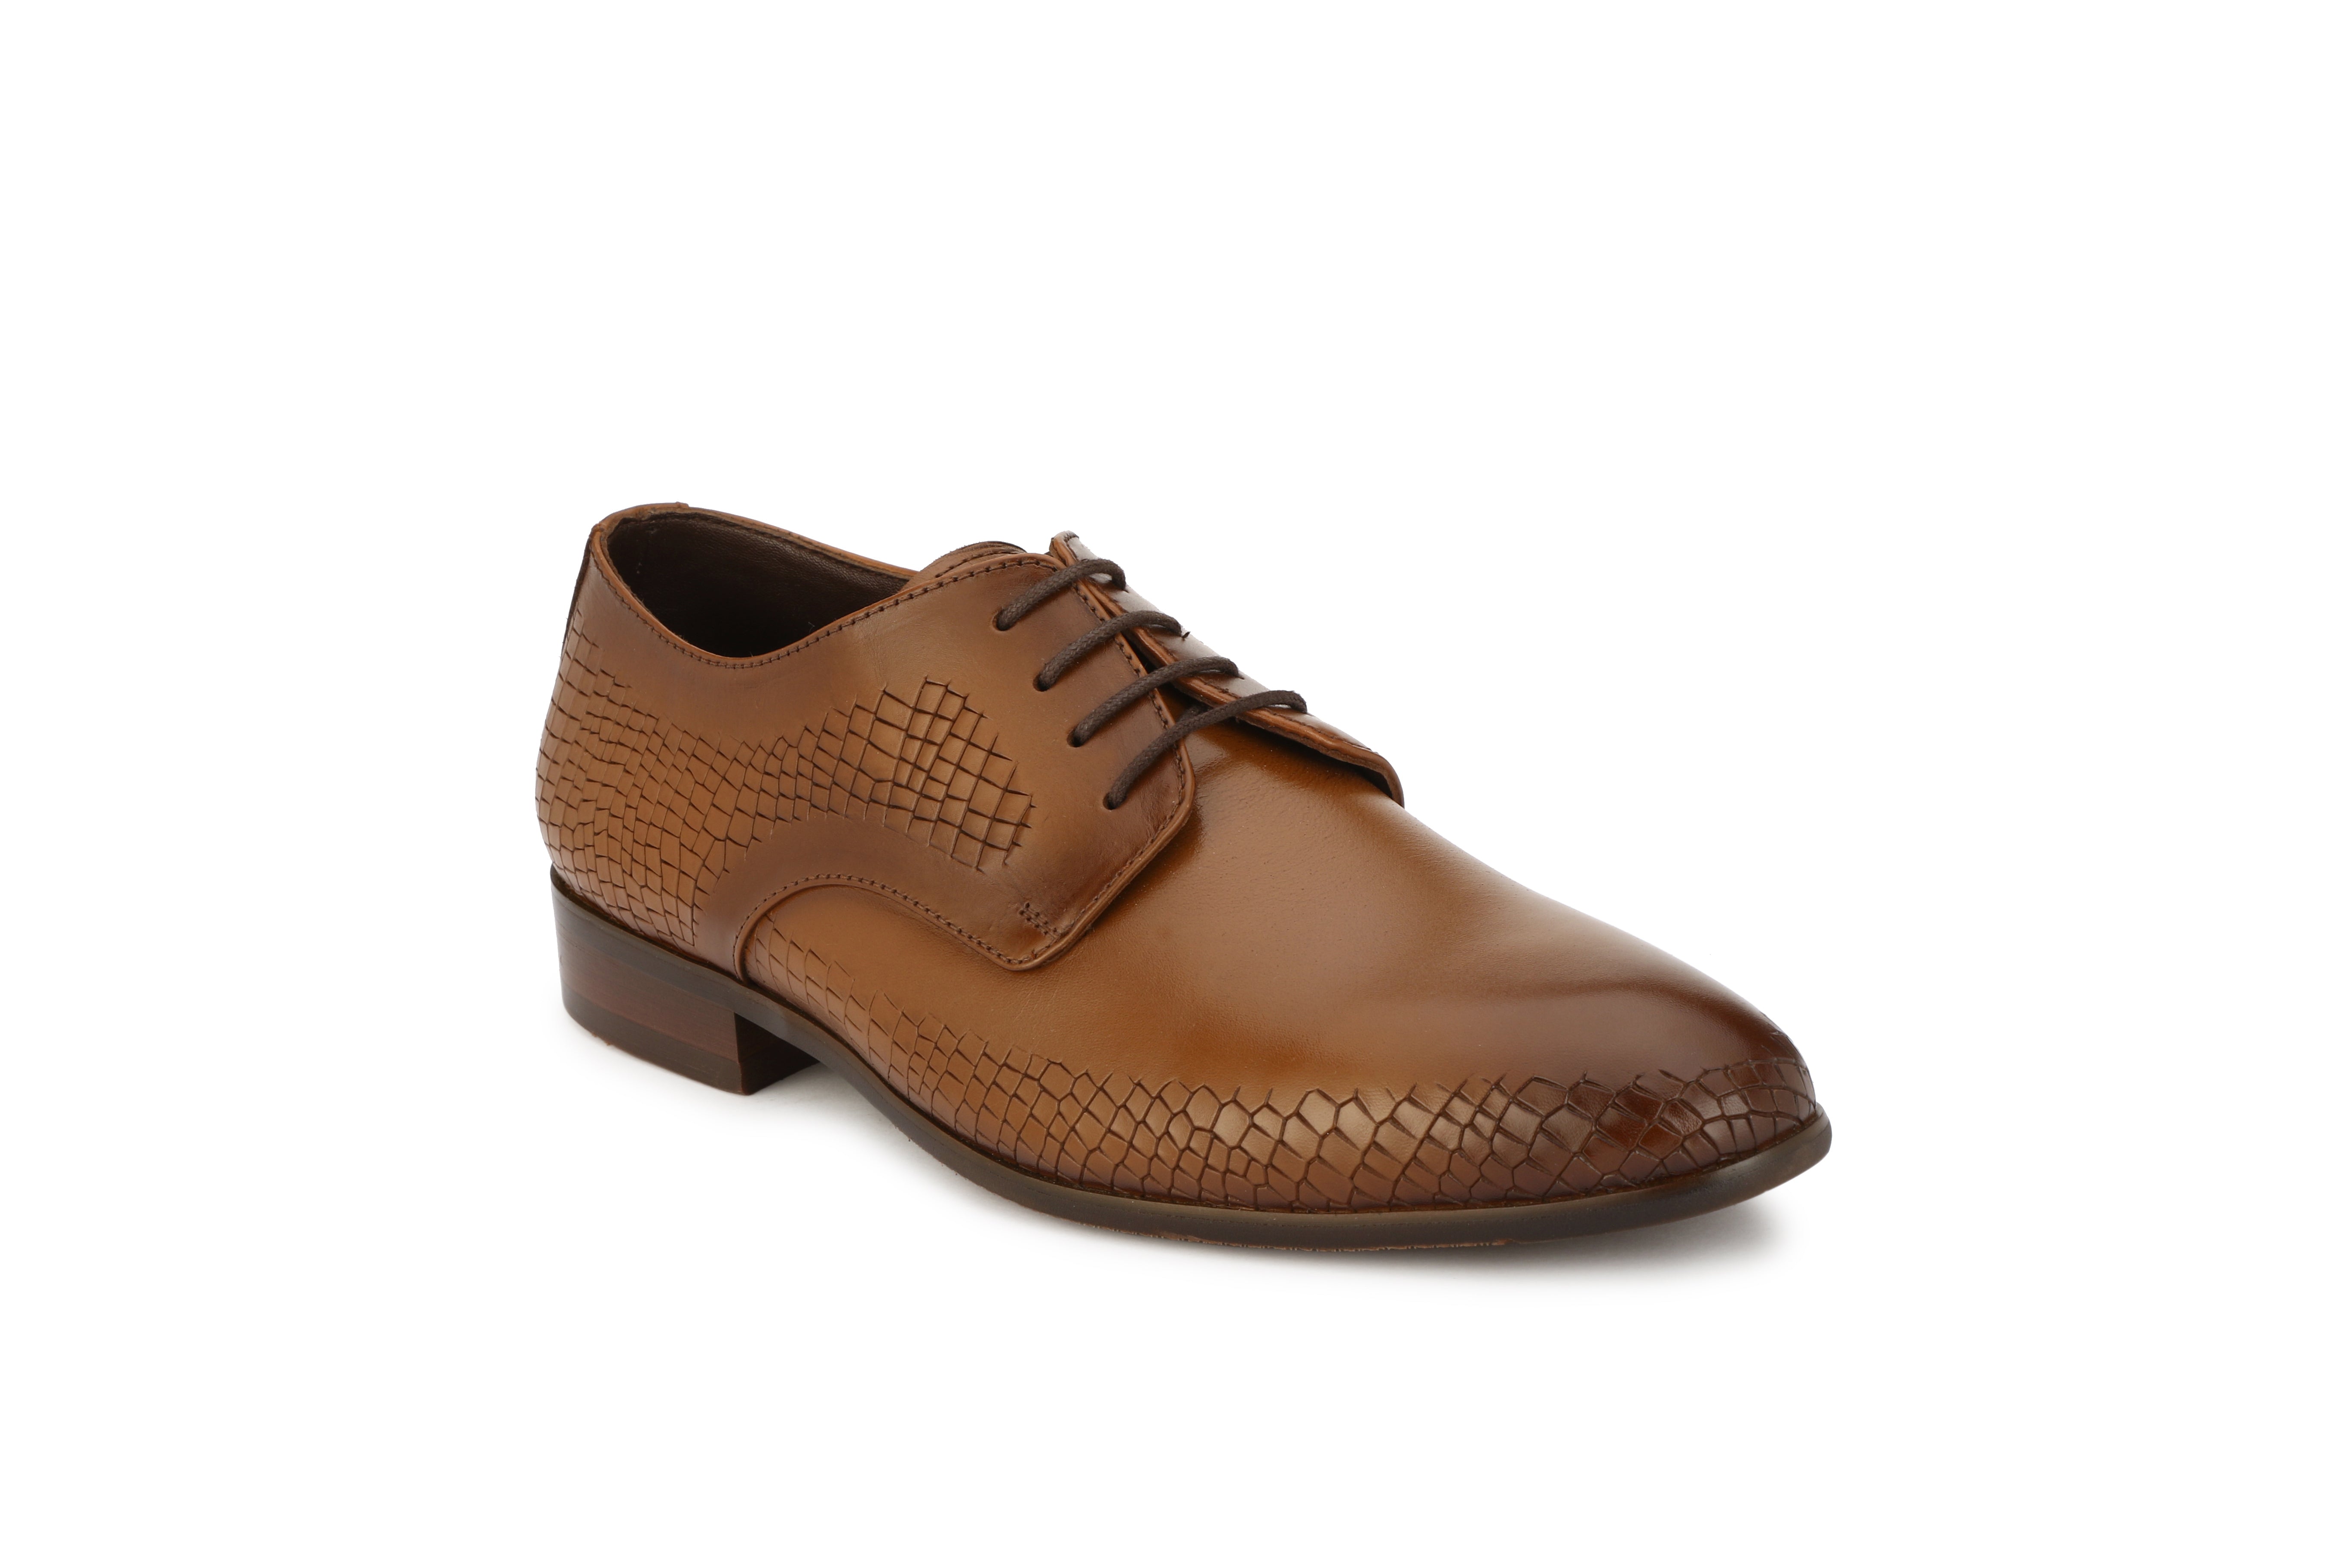 Imprinted Lace Up Shoes For Men